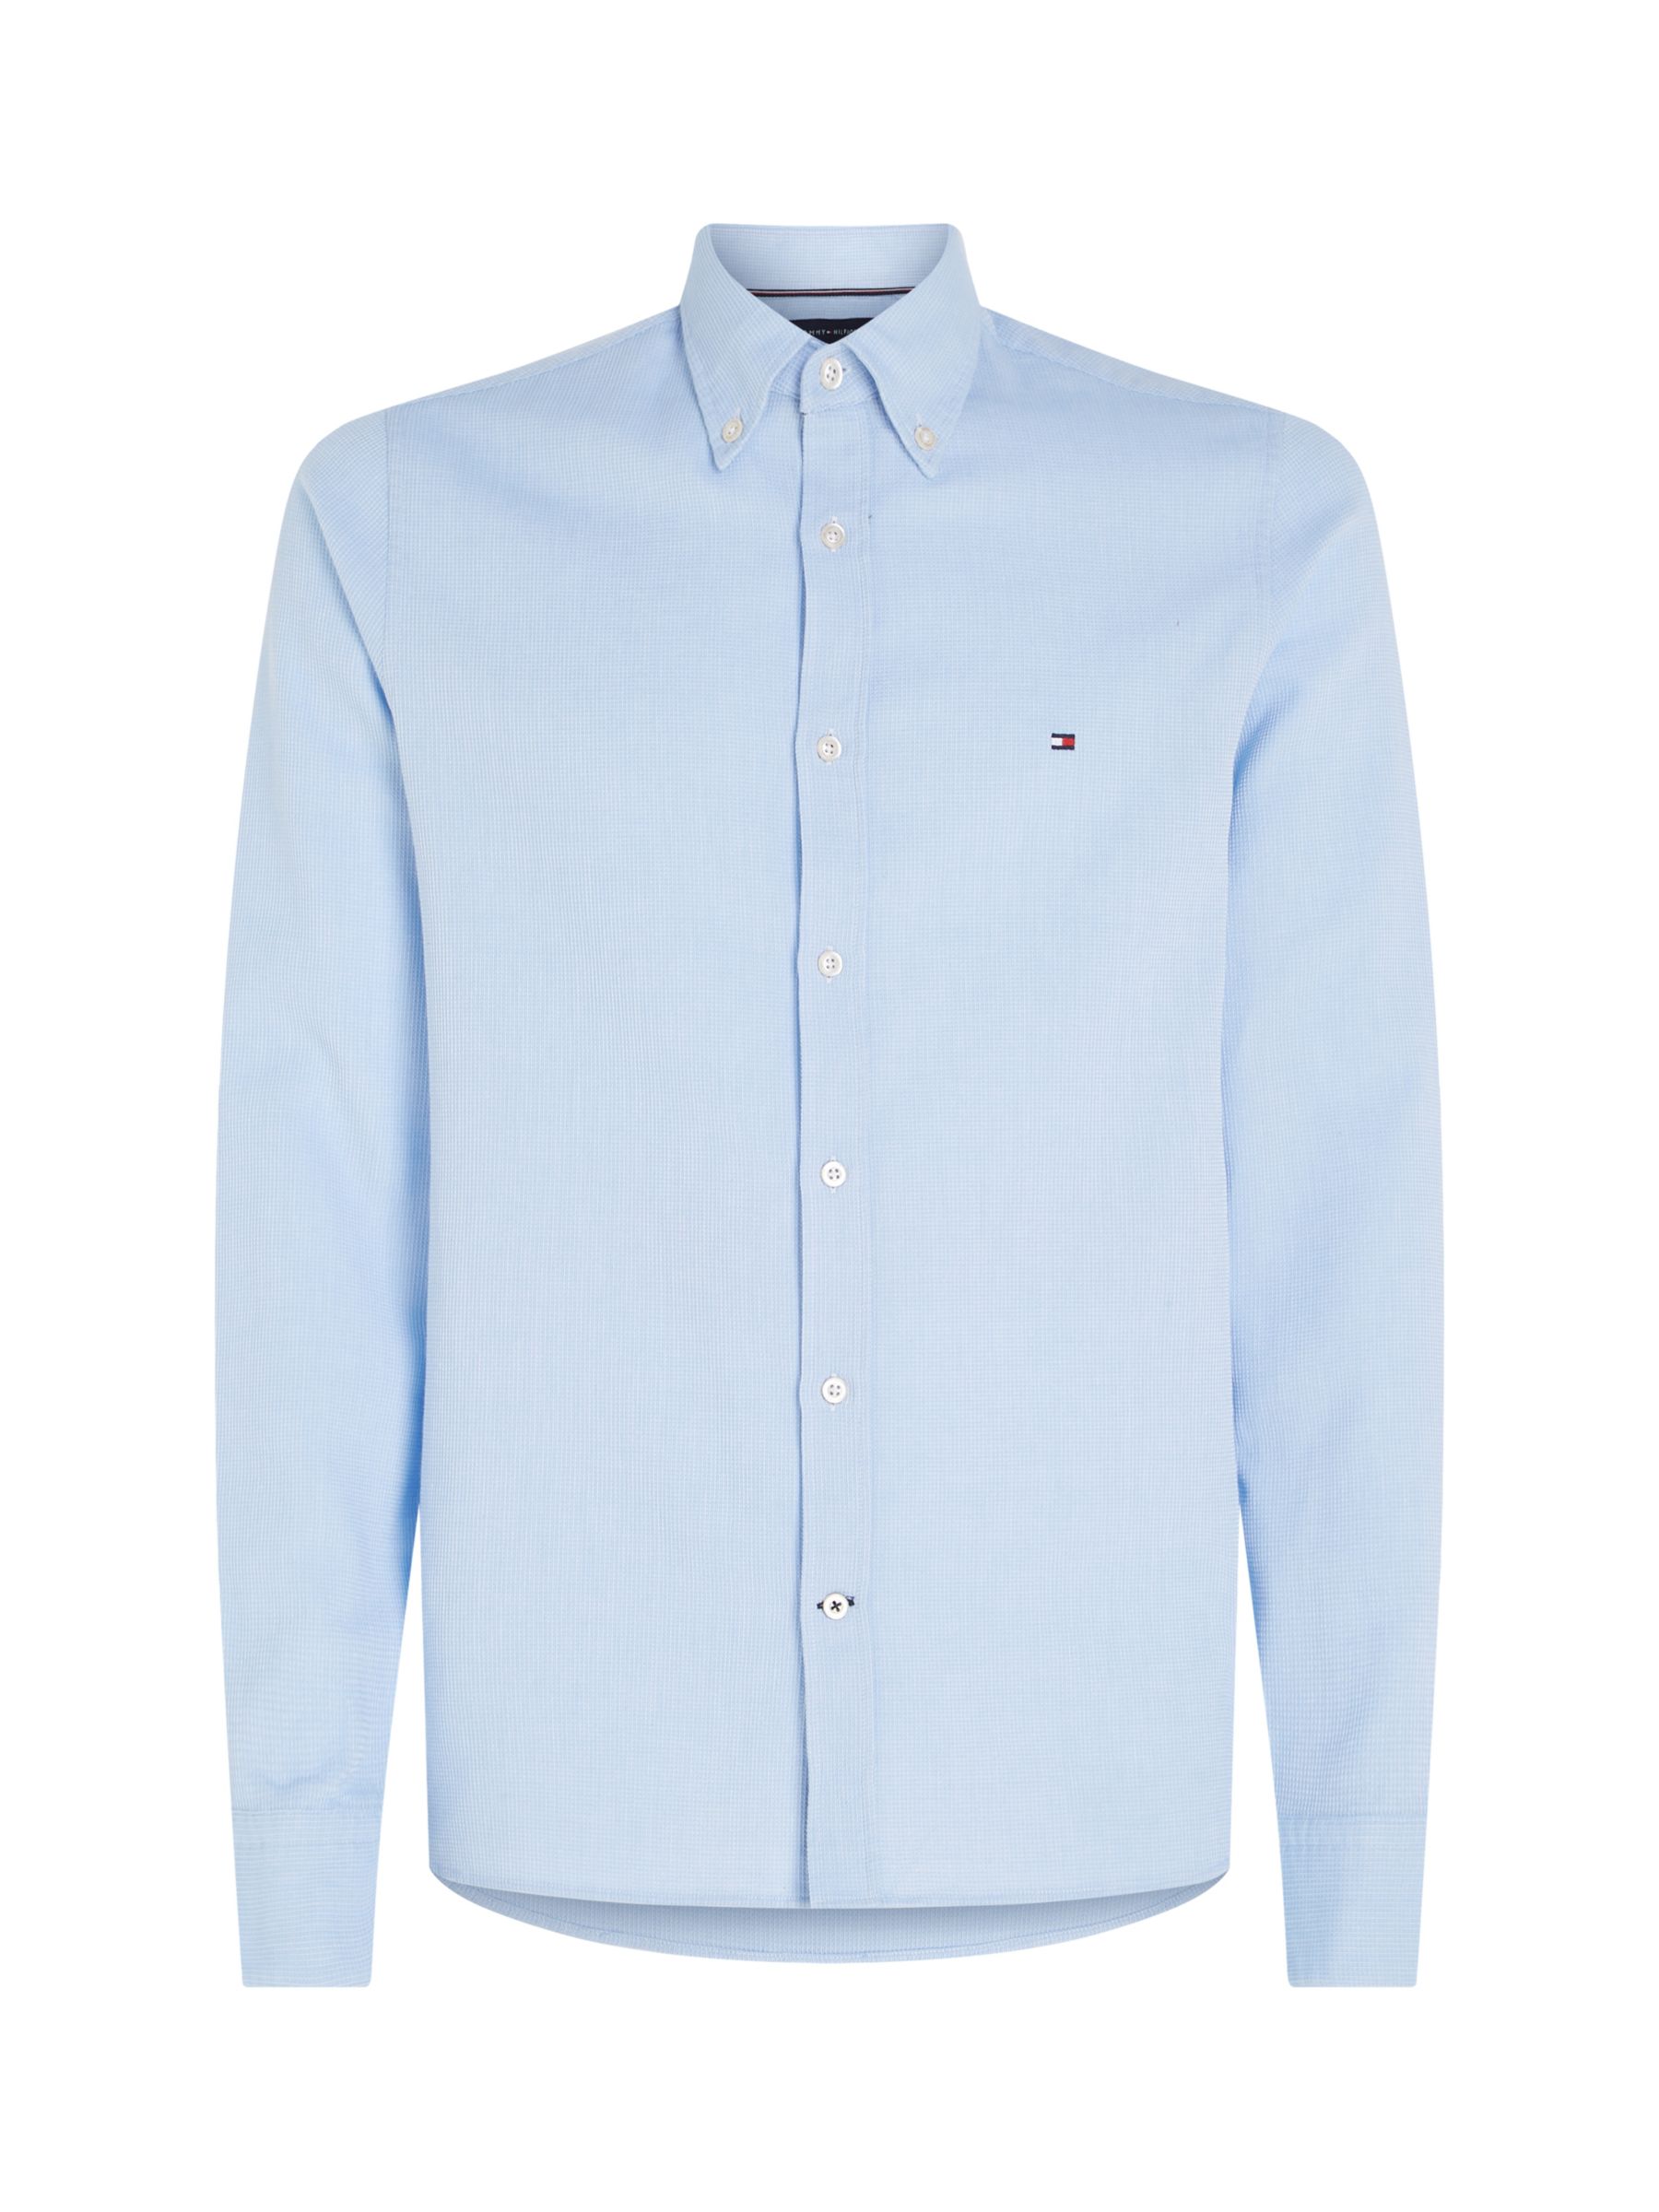 Tommy Hilfiger Dobby Slim Fit Shirt, Cloudy Blue at John Lewis & Partners